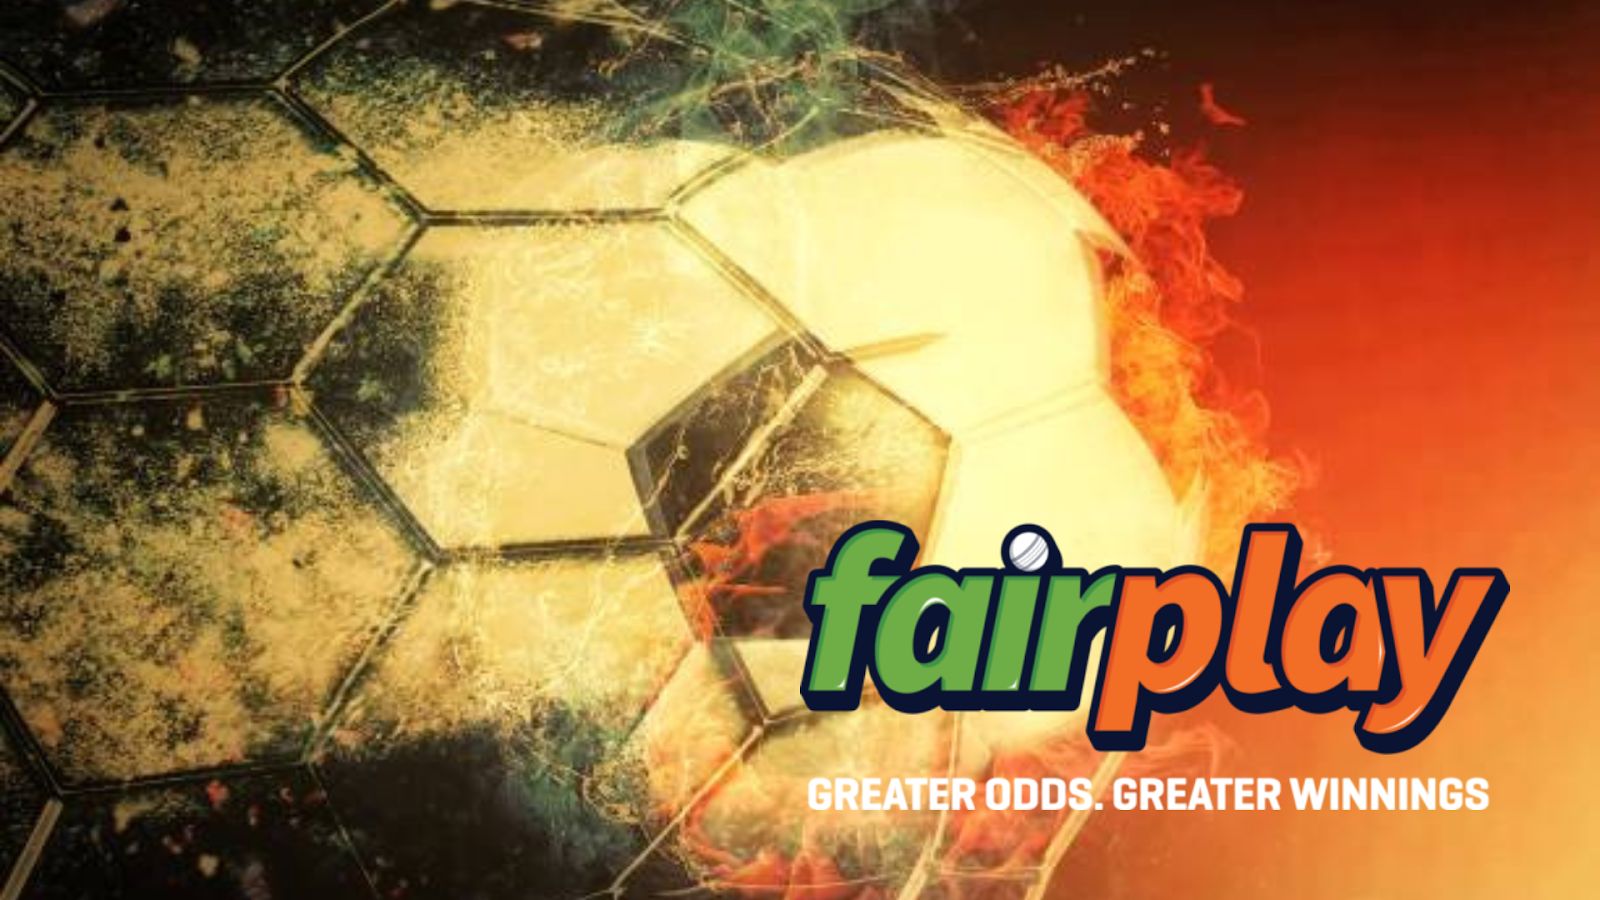 Fairplay Club Review for India